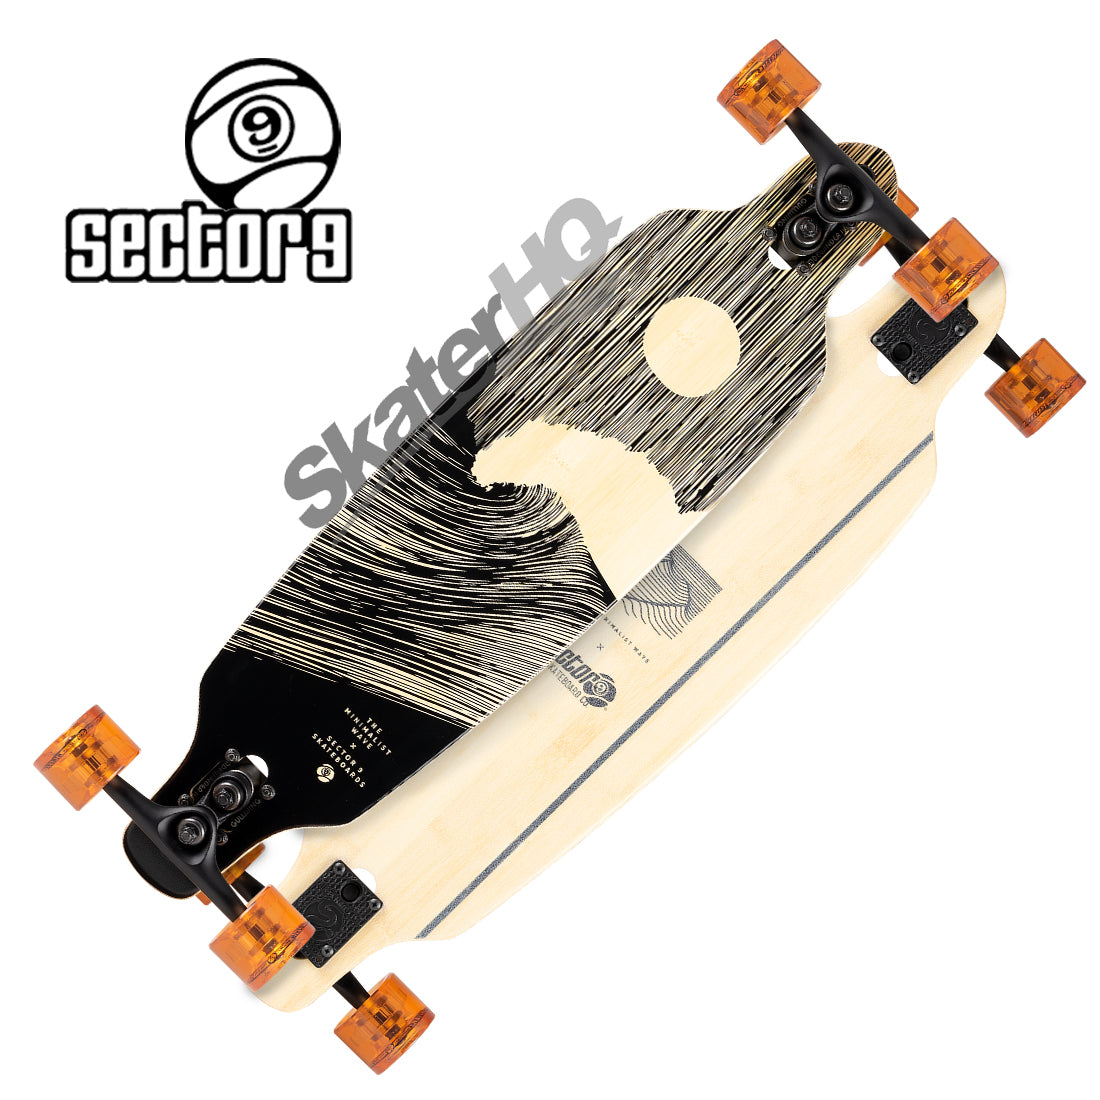 Sector 9 Shoots Full Moon 33.5 Complete - Bamboo Skateboard Completes Longboards